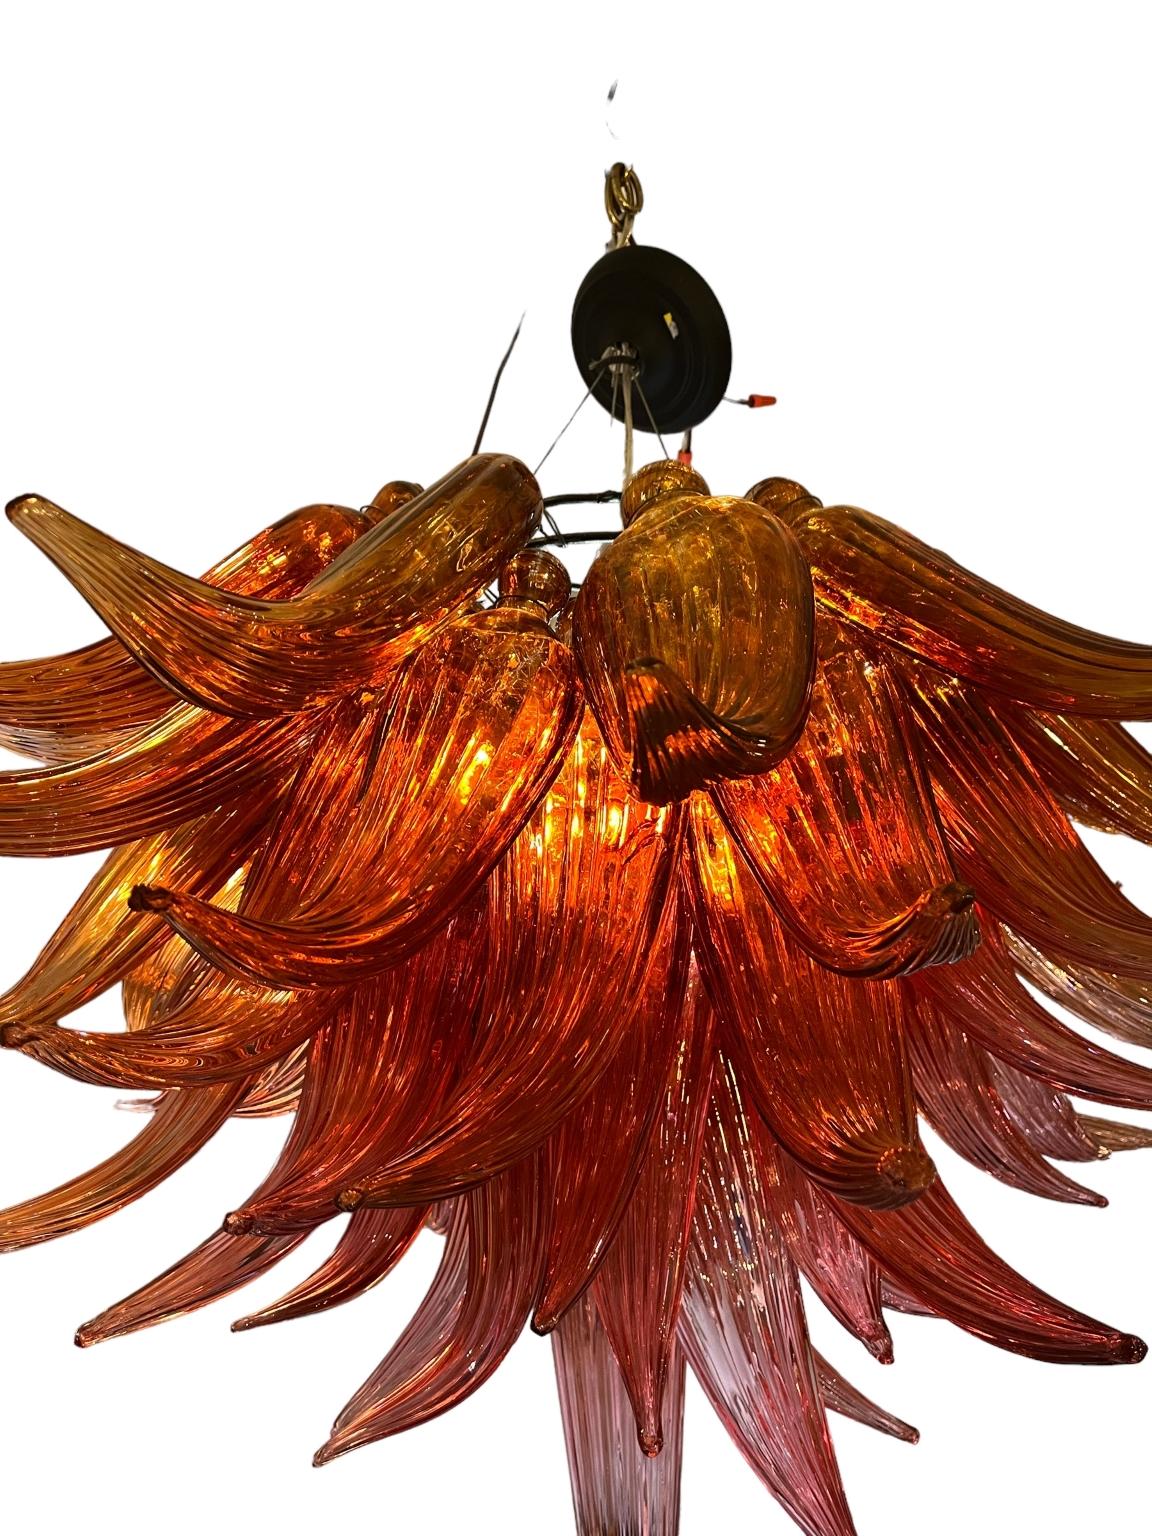 American Modern Hand Blown Studio Glass Chandelier in the Manner of Dale Chihuly